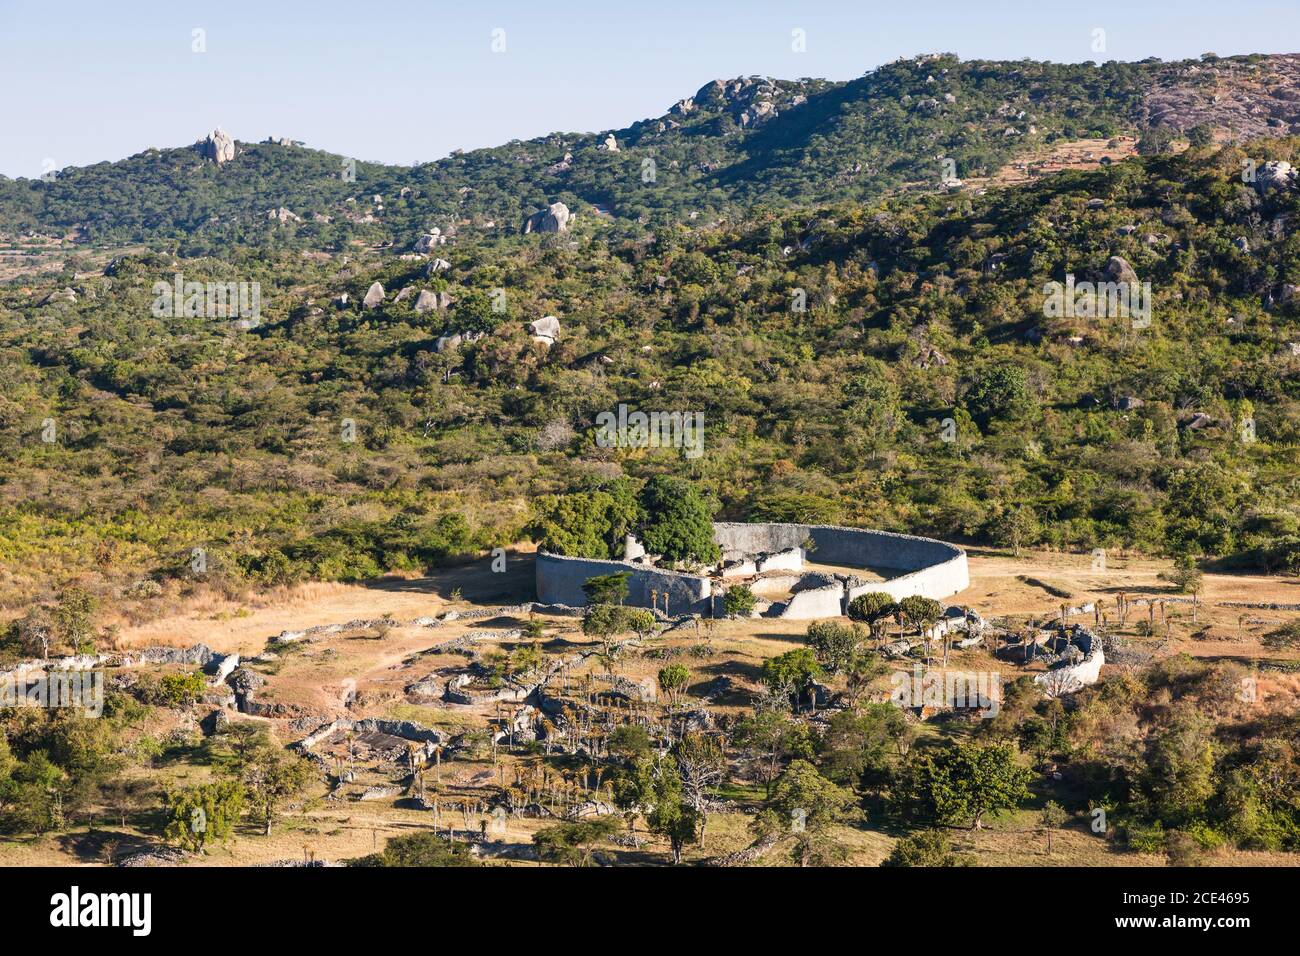 Great Zimbabwe ruins, the Great Enclosure, distant view from the Acropolis, ancient capital of Bantu civilization, Masvingo Province, Zimbabwe, Africa Stock Photo